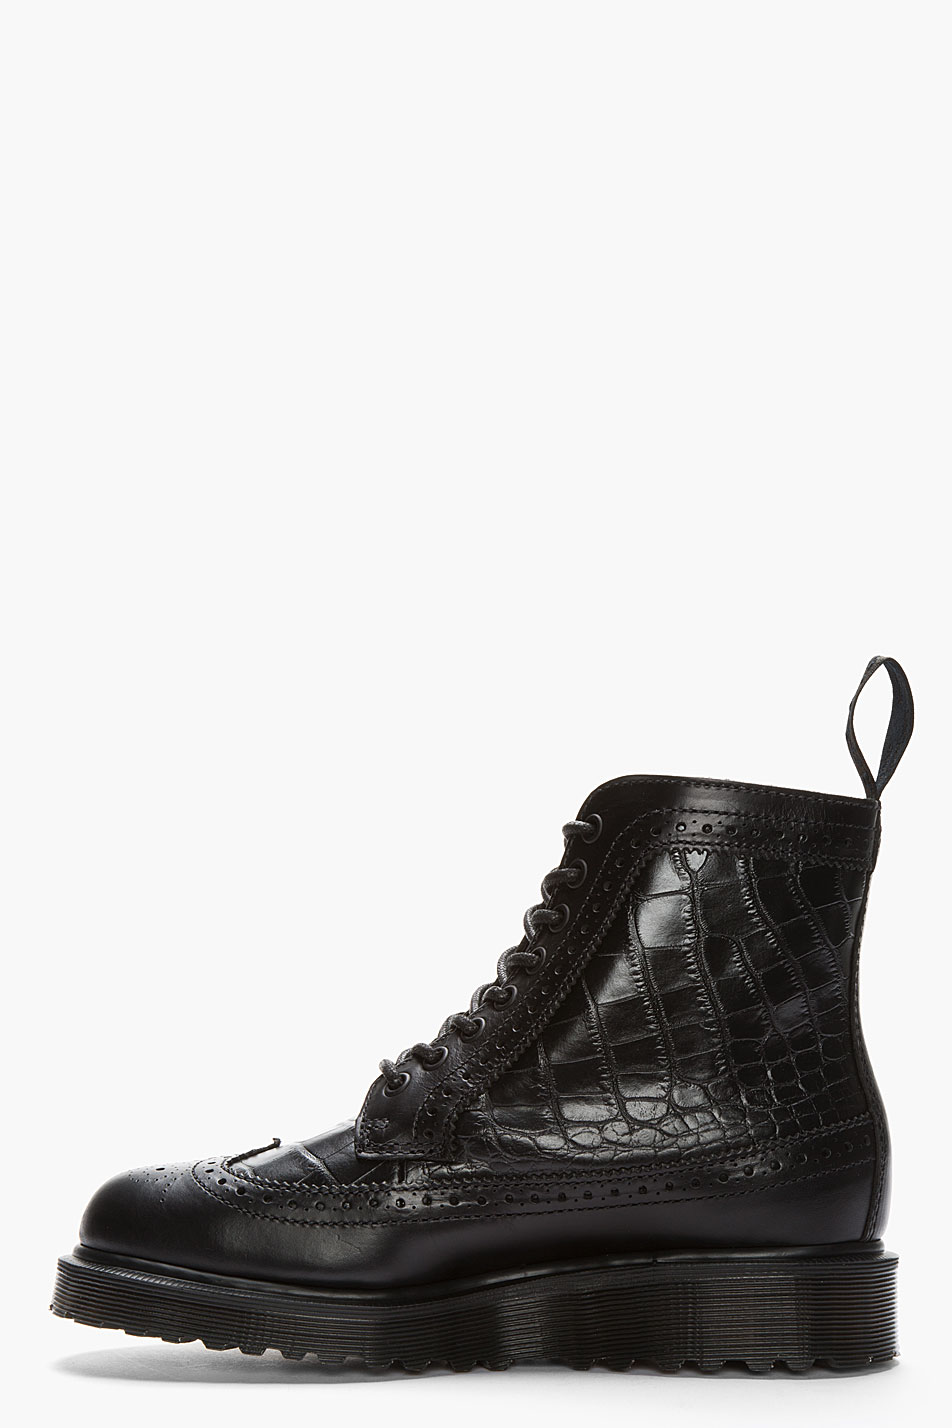 Dr. Martens Black Leather Croc-embossed Marcus Brogue Boots for Men - Lyst